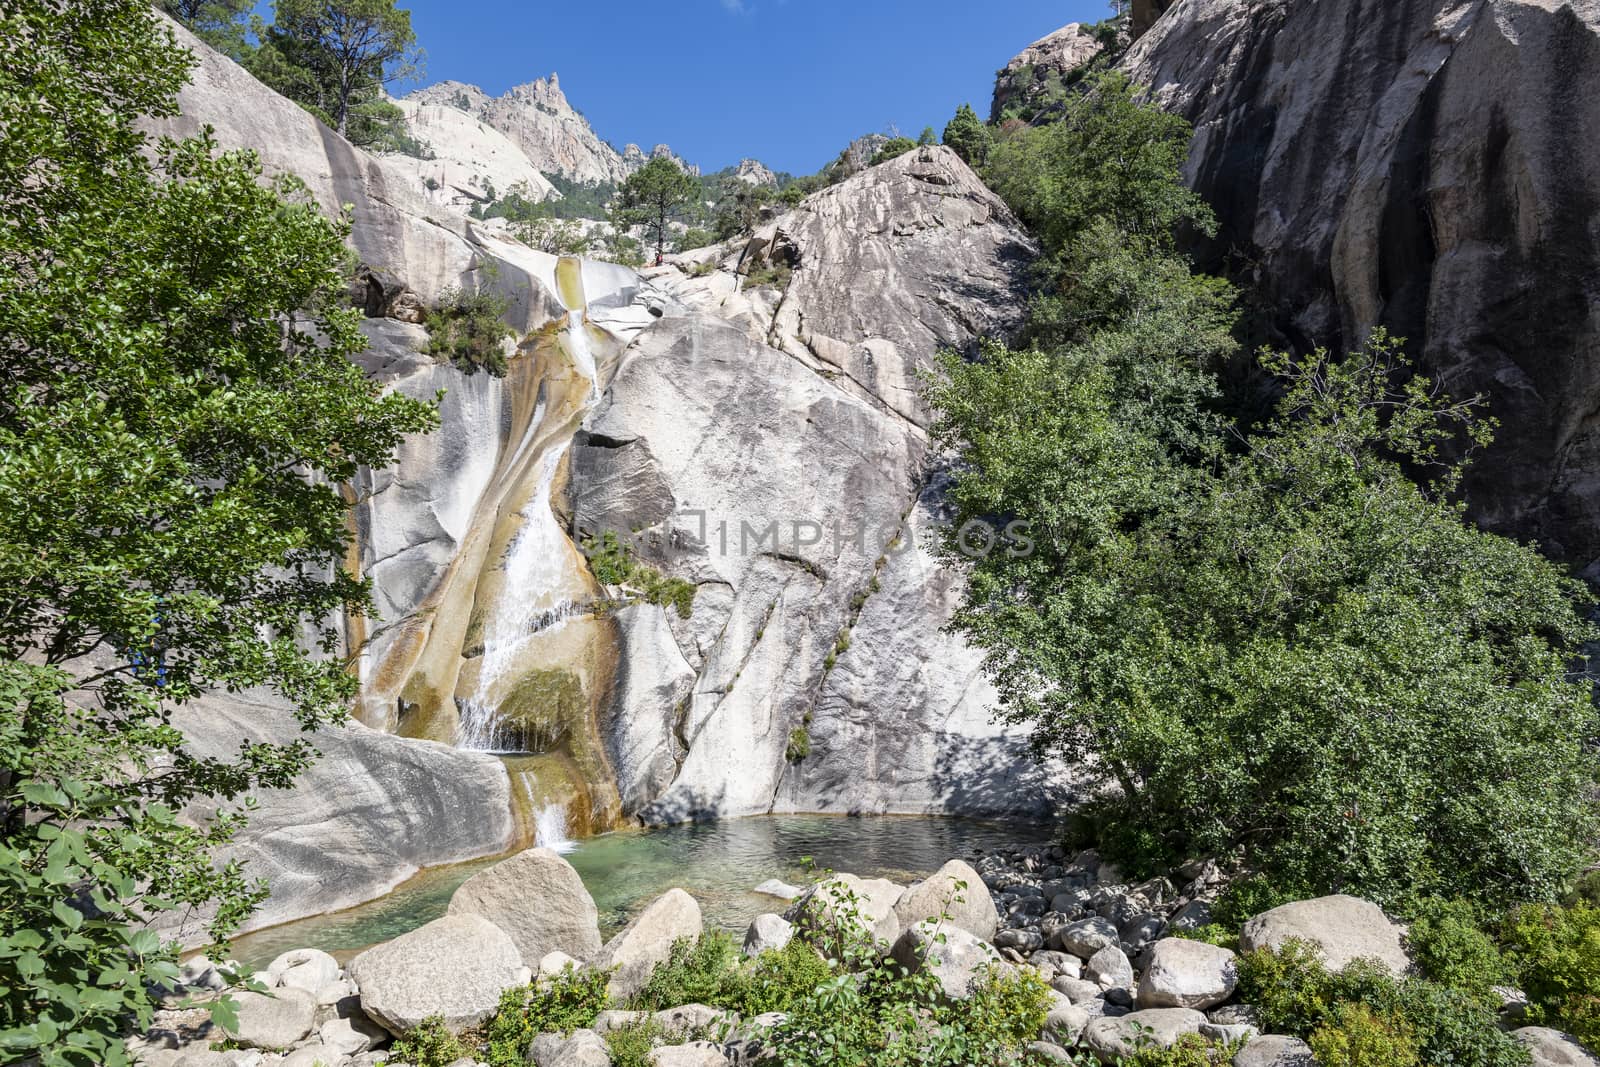 Waterfall and natural pool in the famous Purcaraccia Canyon in Bavella during summer, a tourist destination and attraction (for canyoning and hiking). Corsica, France